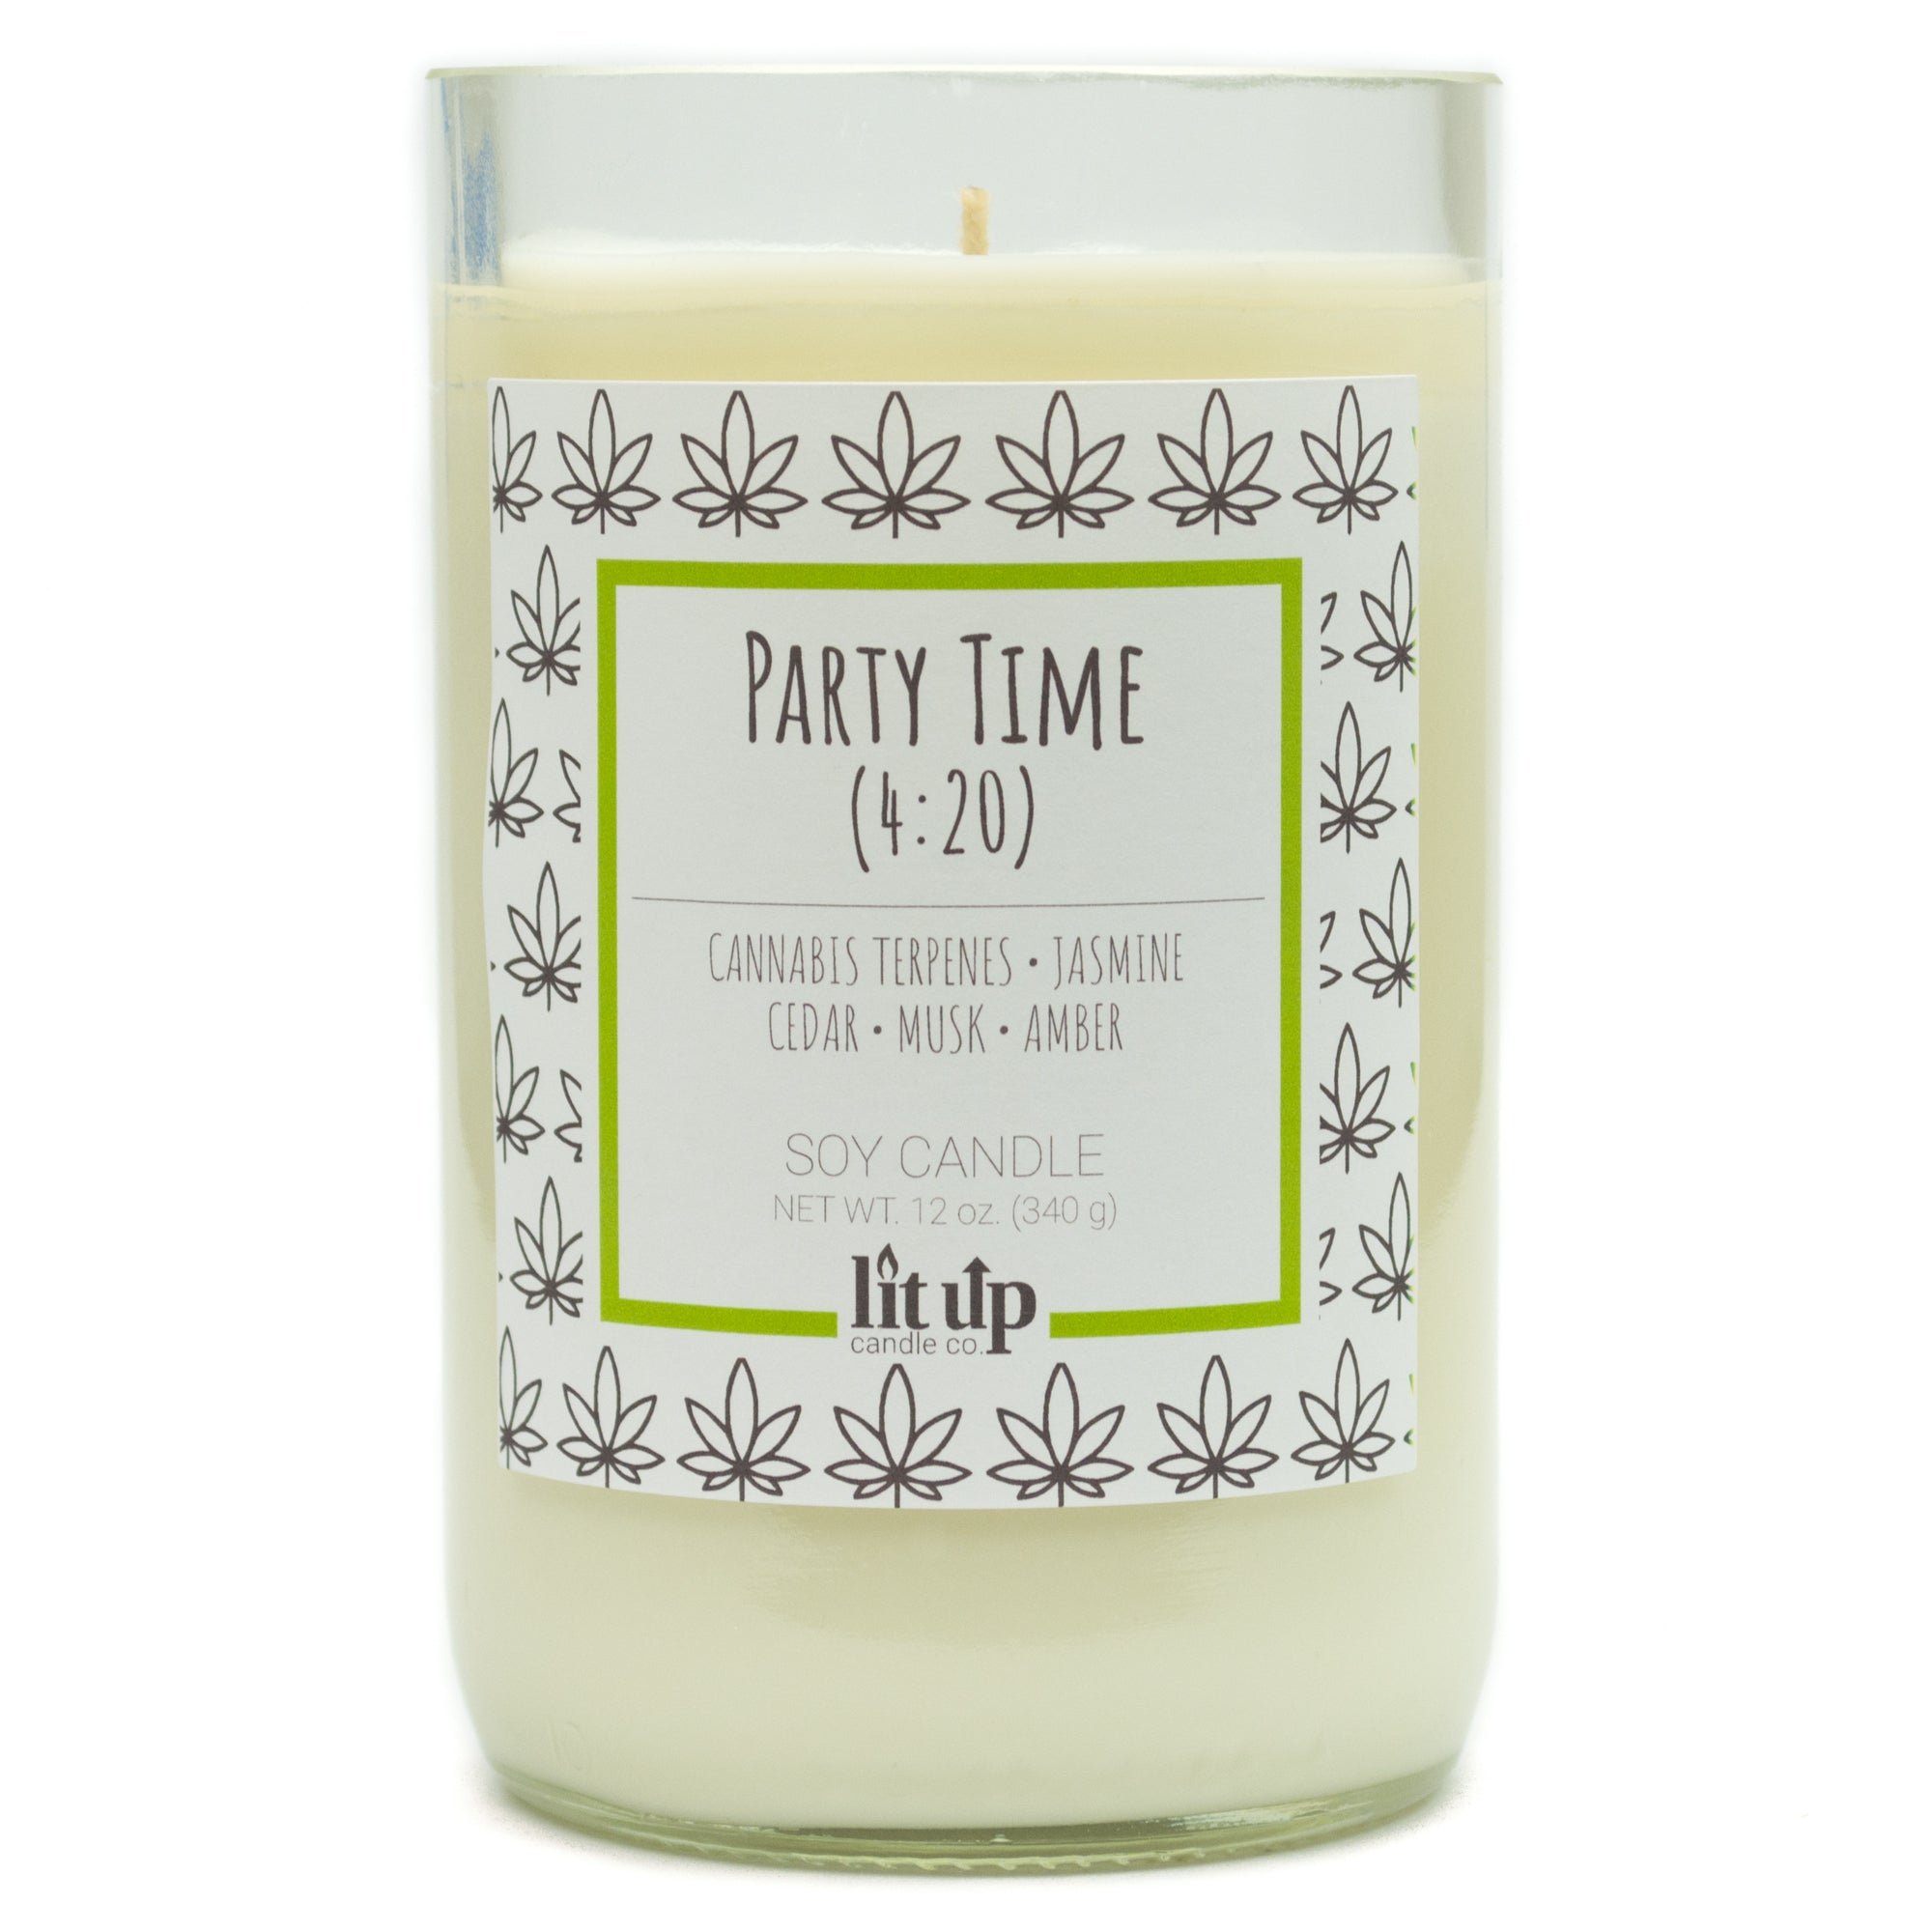 Party Time (4:20) scented 12 oz. soy candle in upcycled wine bottle - FKA Cannabis Flower